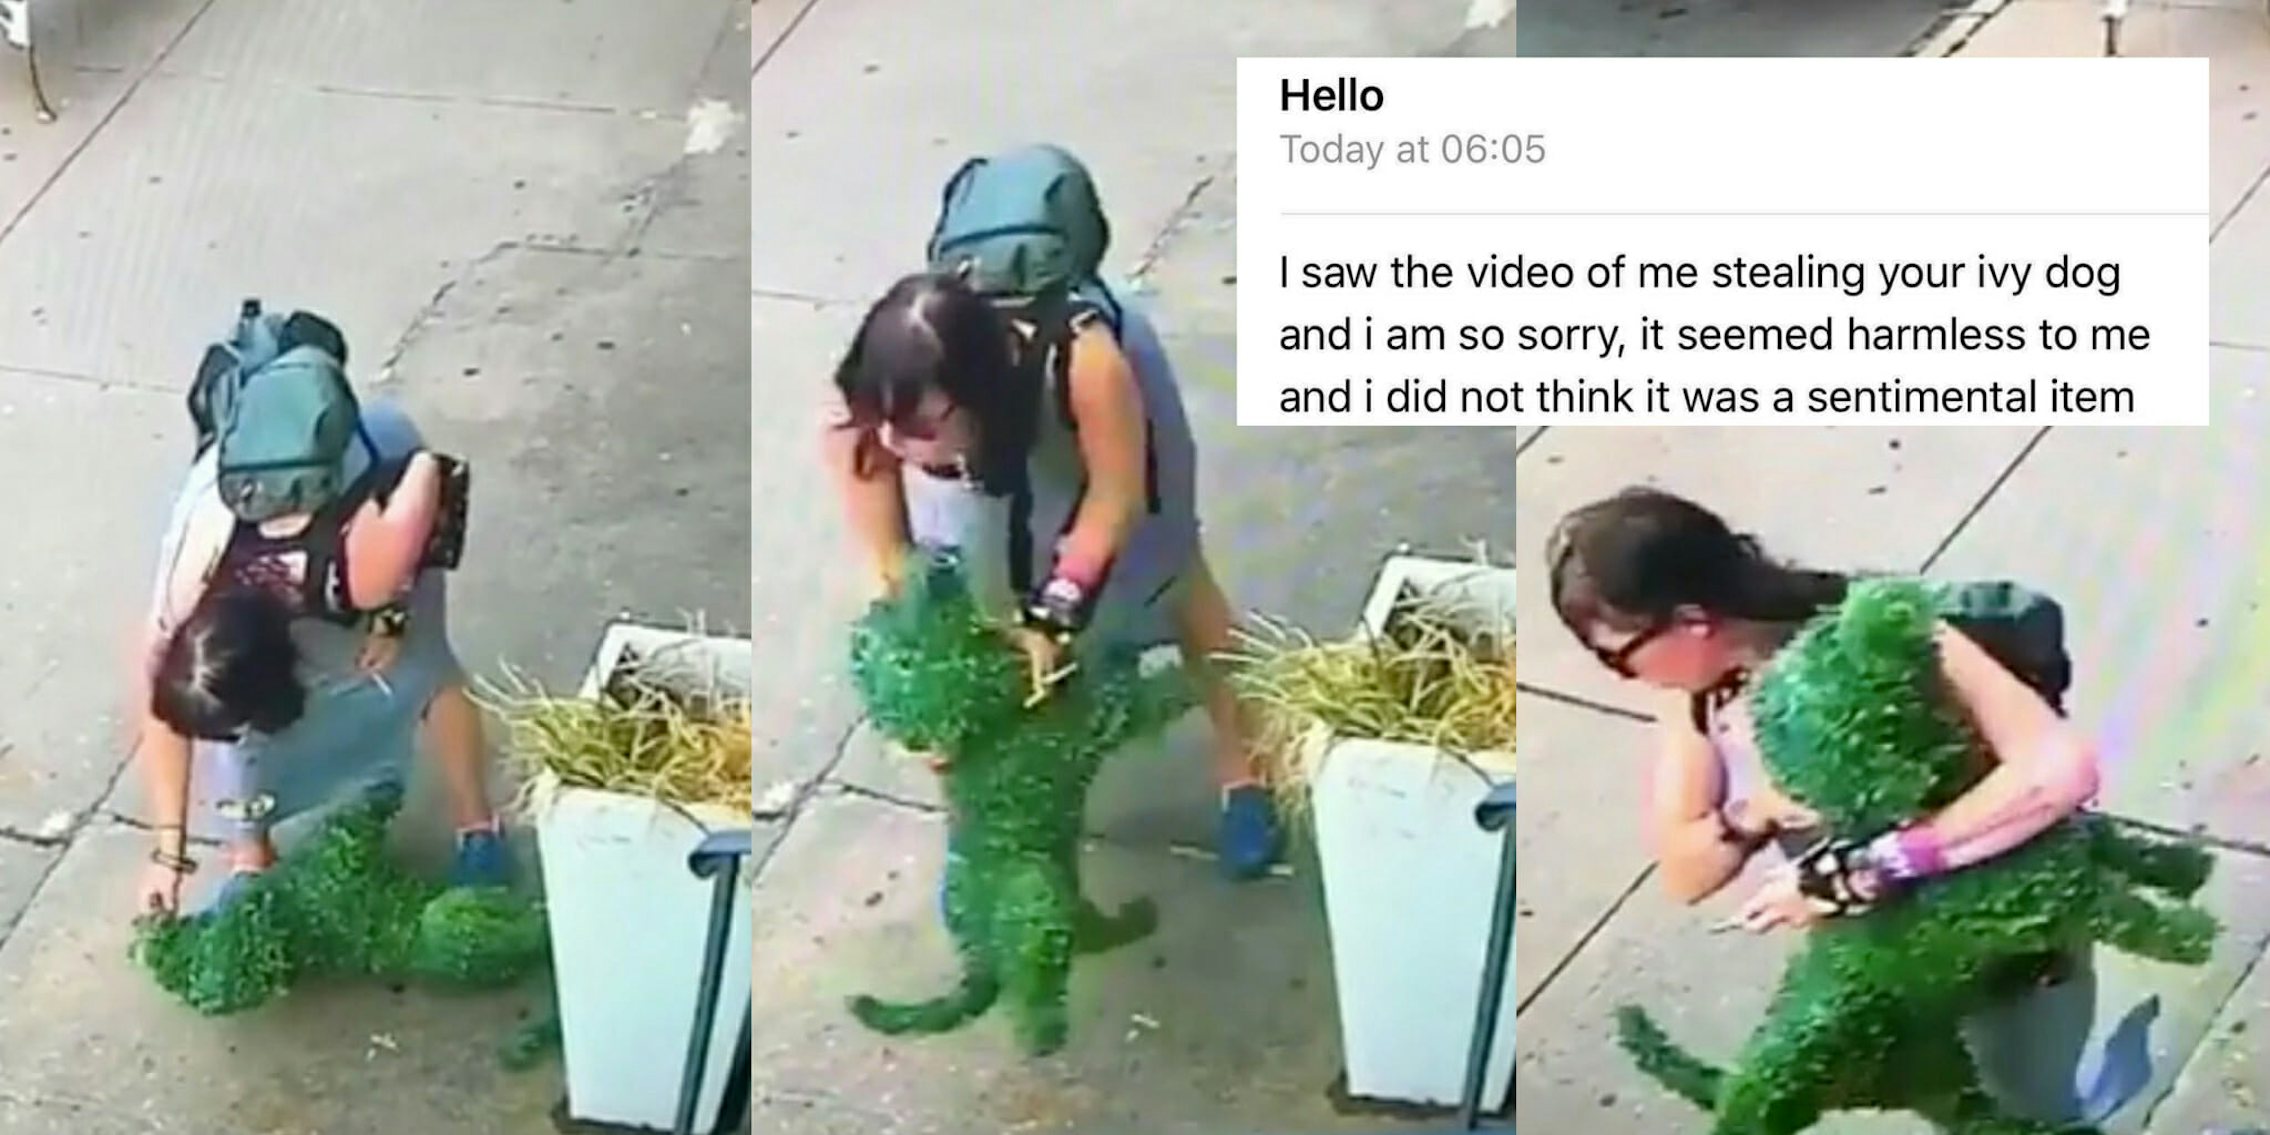 Woman steals a topiary dog from a Brooklyn bakery then apologizes via email.